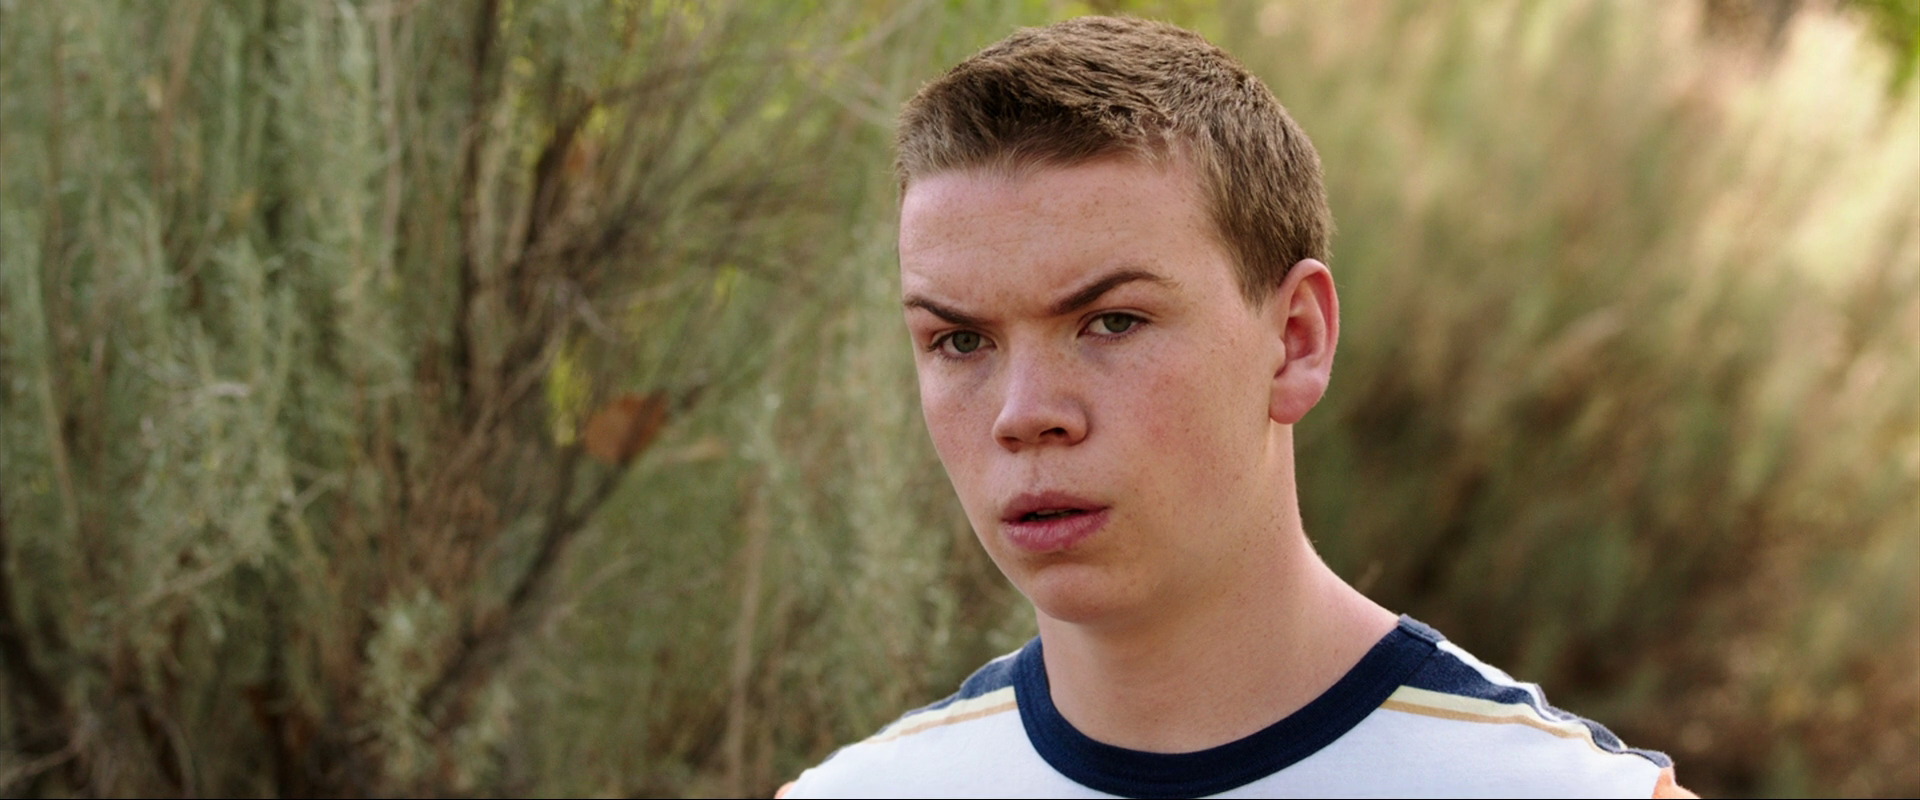 Screen Captures - were-the-millers-0513 - Will Poulter Photo Gallery.